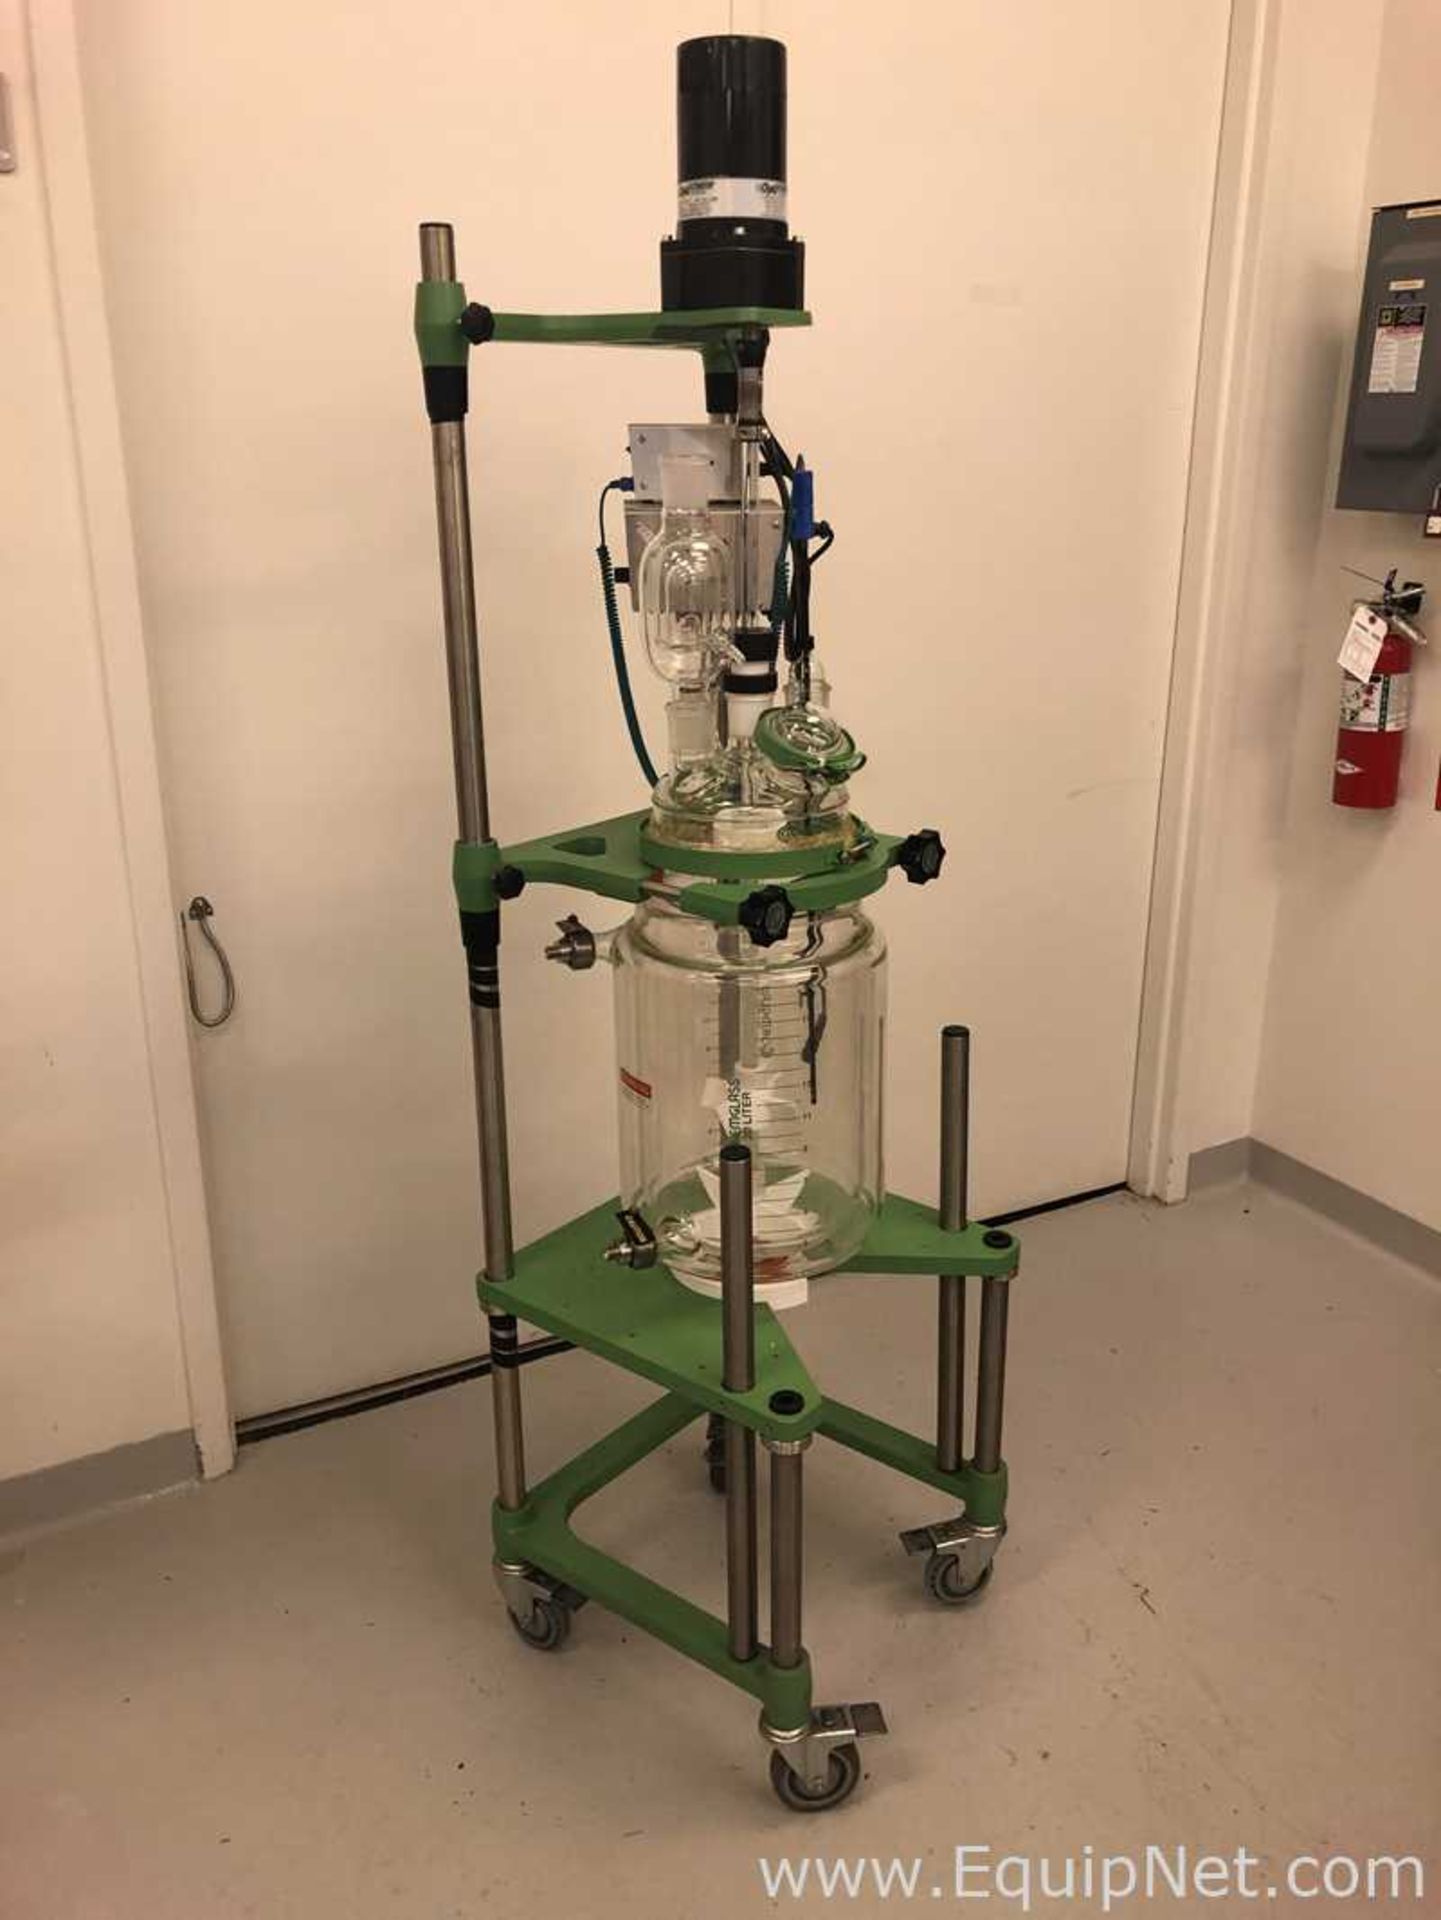 Chemglass 20L Jacketed Glass Reactor With Top Agitation And OptiCHEM Temp Monitor - Image 13 of 16